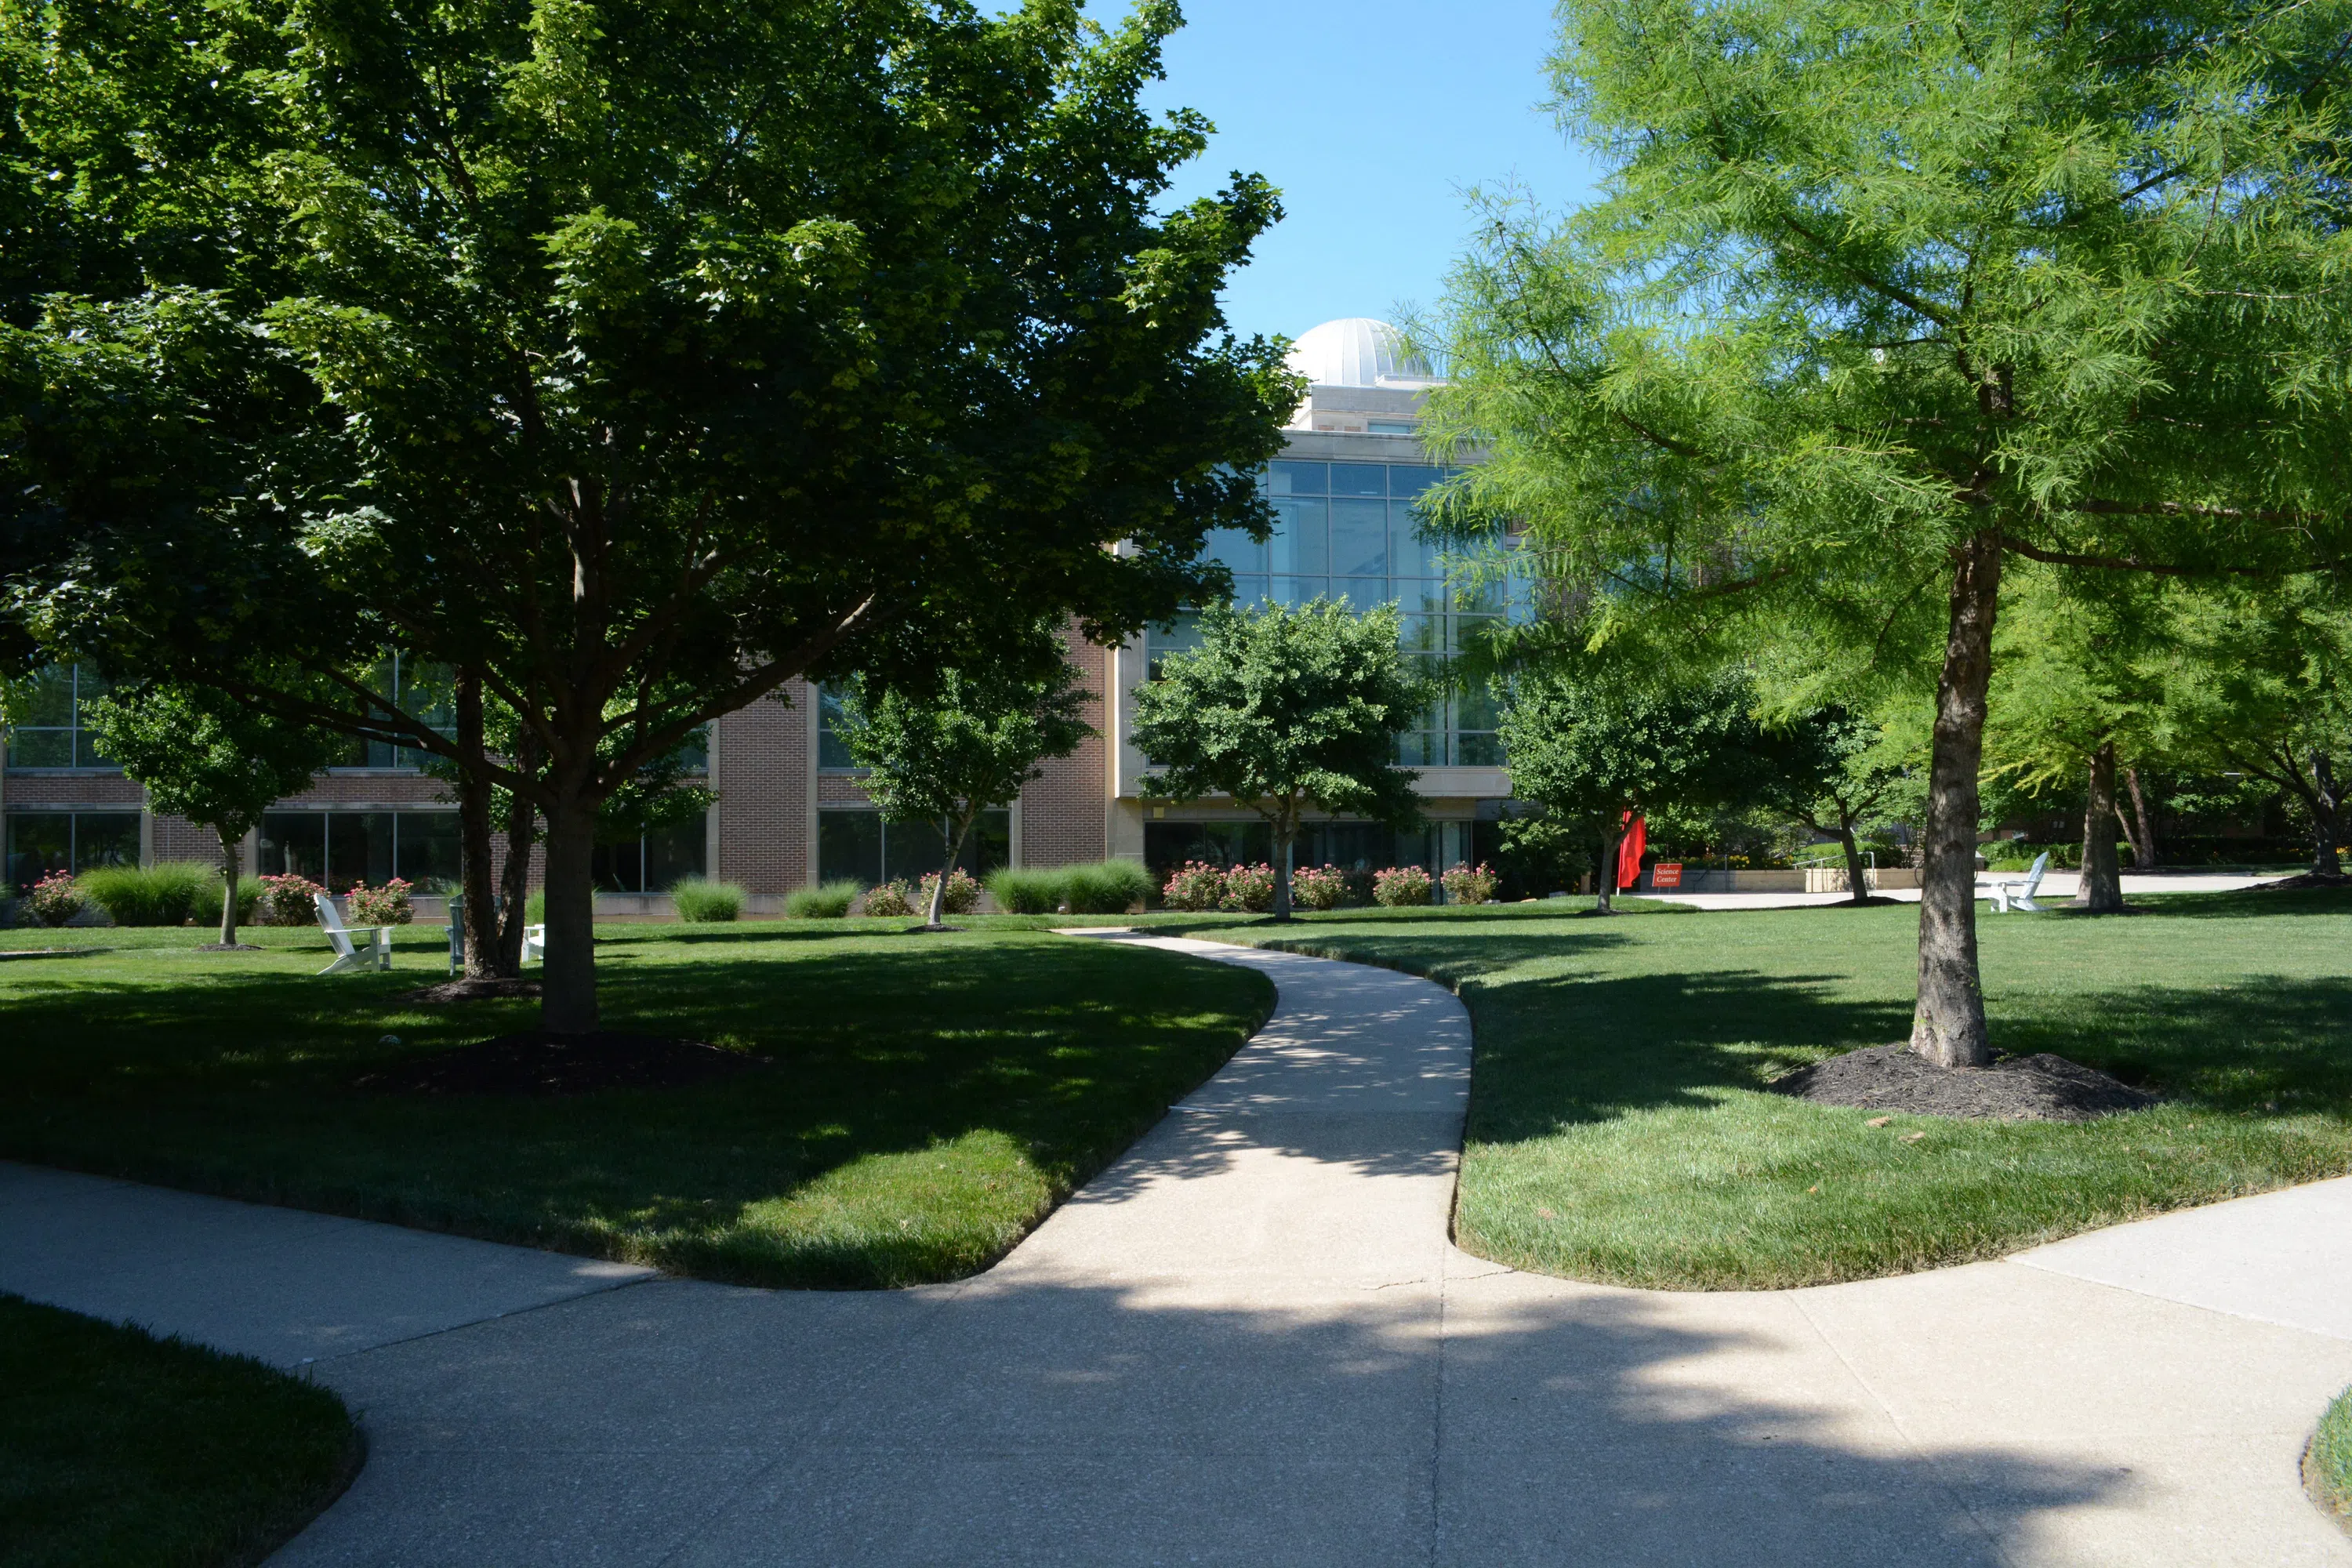 View from a green area of campus between Battelle Hall (Music), The Shear-McFadden Science Center, and Towers Hall.